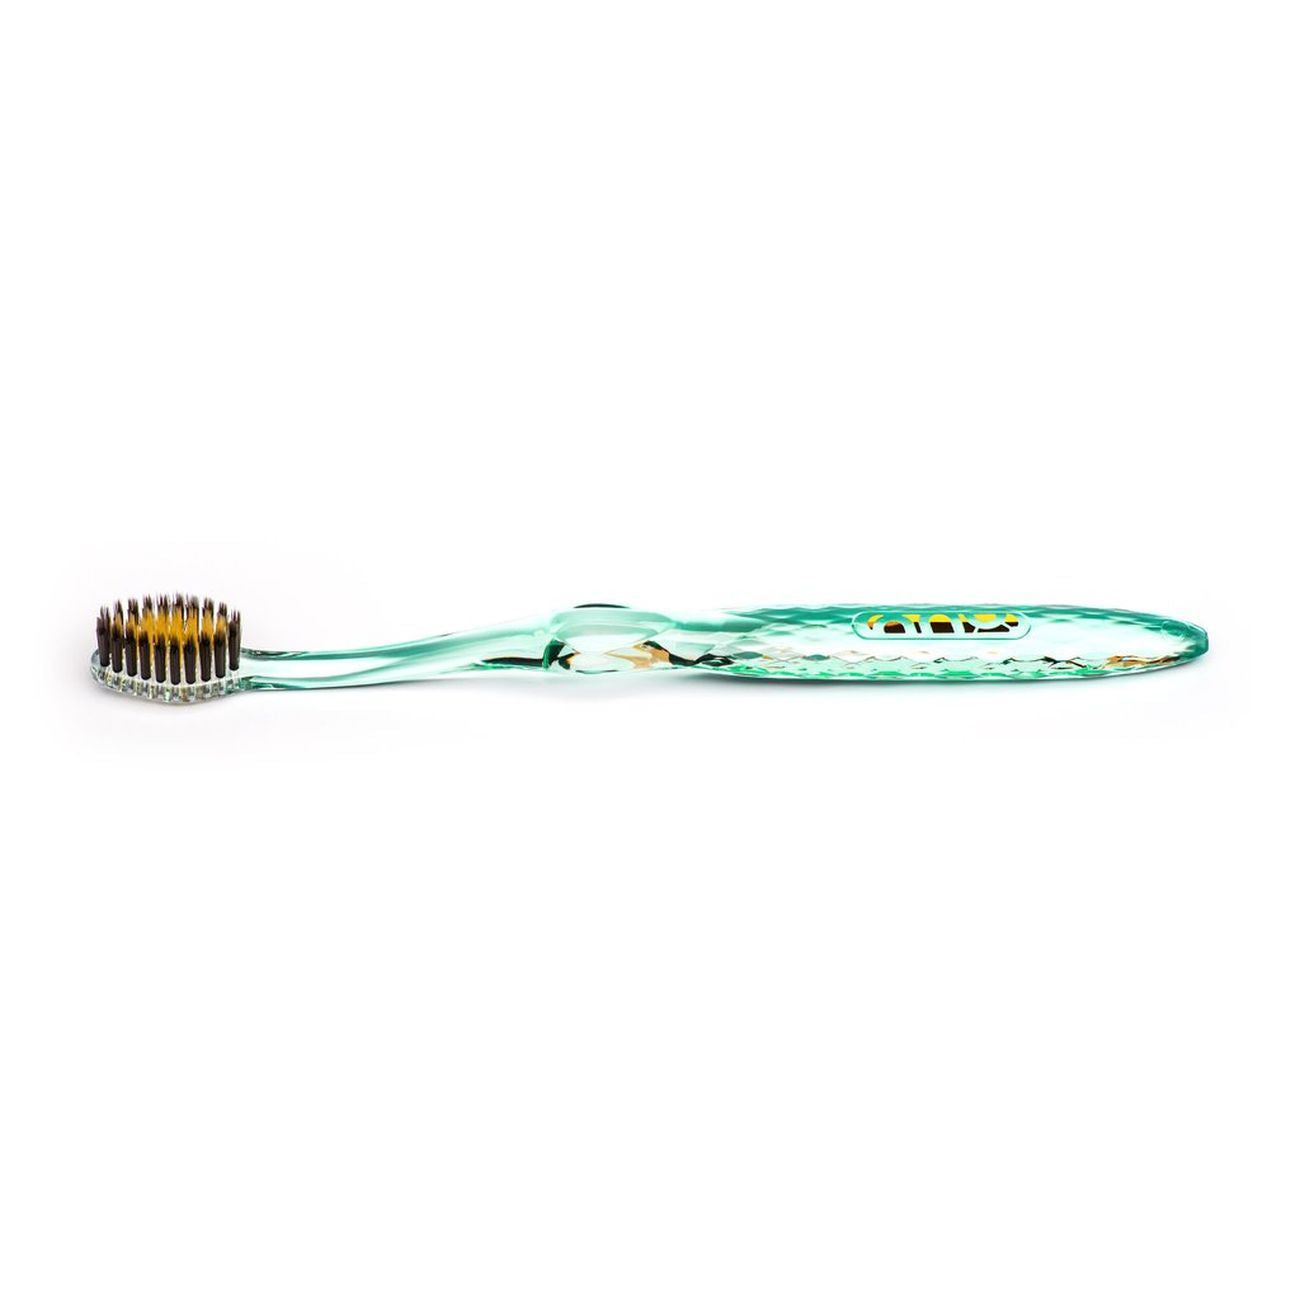 Charcoal & Gold Toothbrush Green Handle